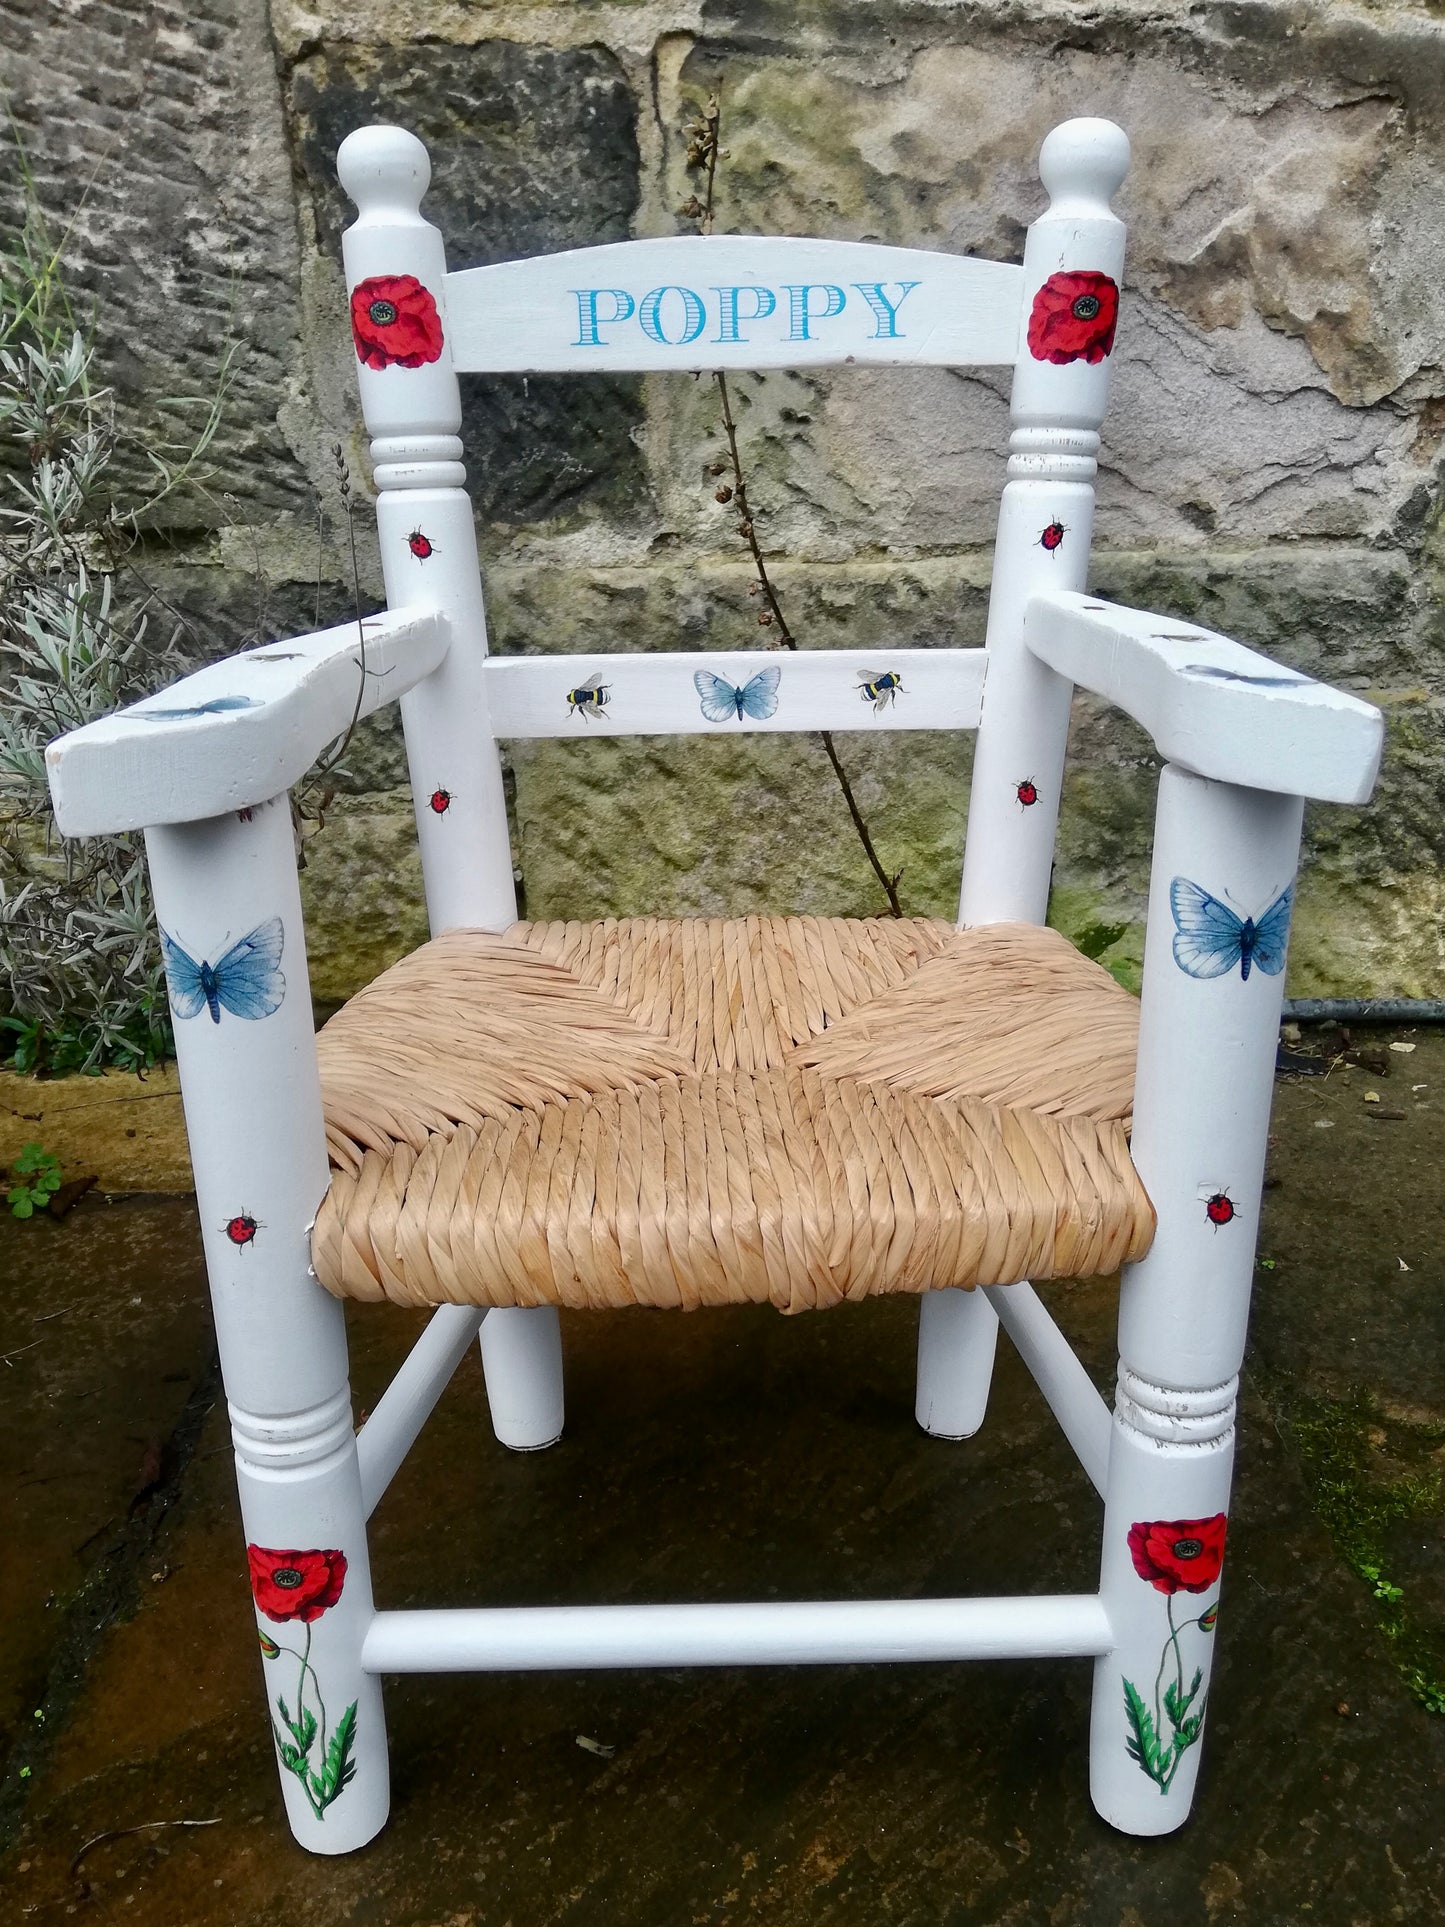 Commission for Emma personalised children's chair with poppy daisy bees and butterfly theme